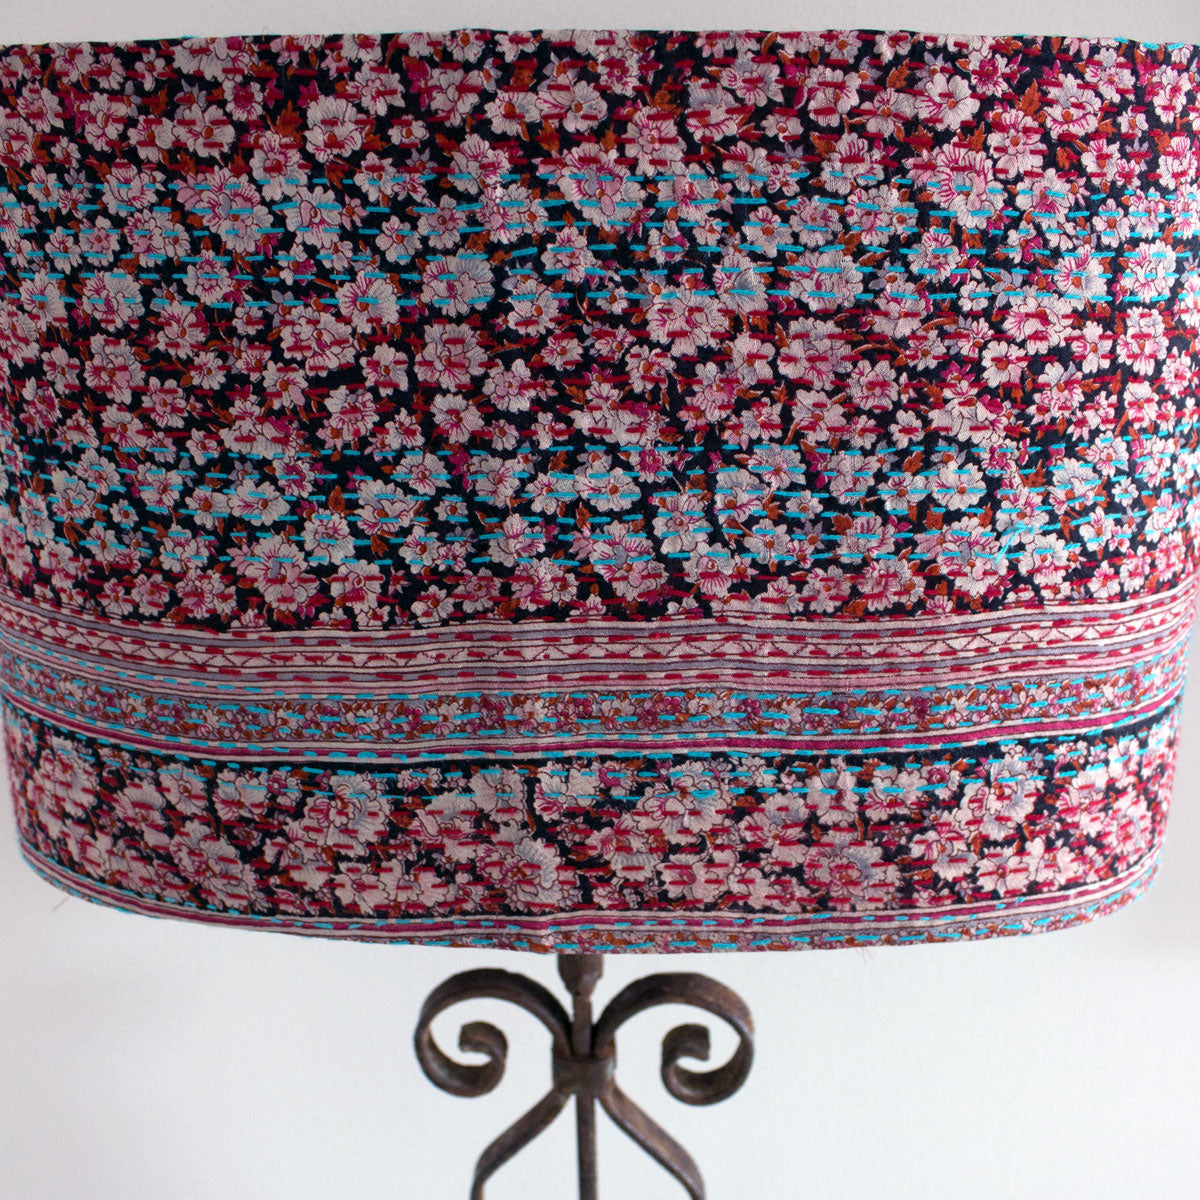 Table lamp Bela upcycled from architectural salvage and Kantha lampshade